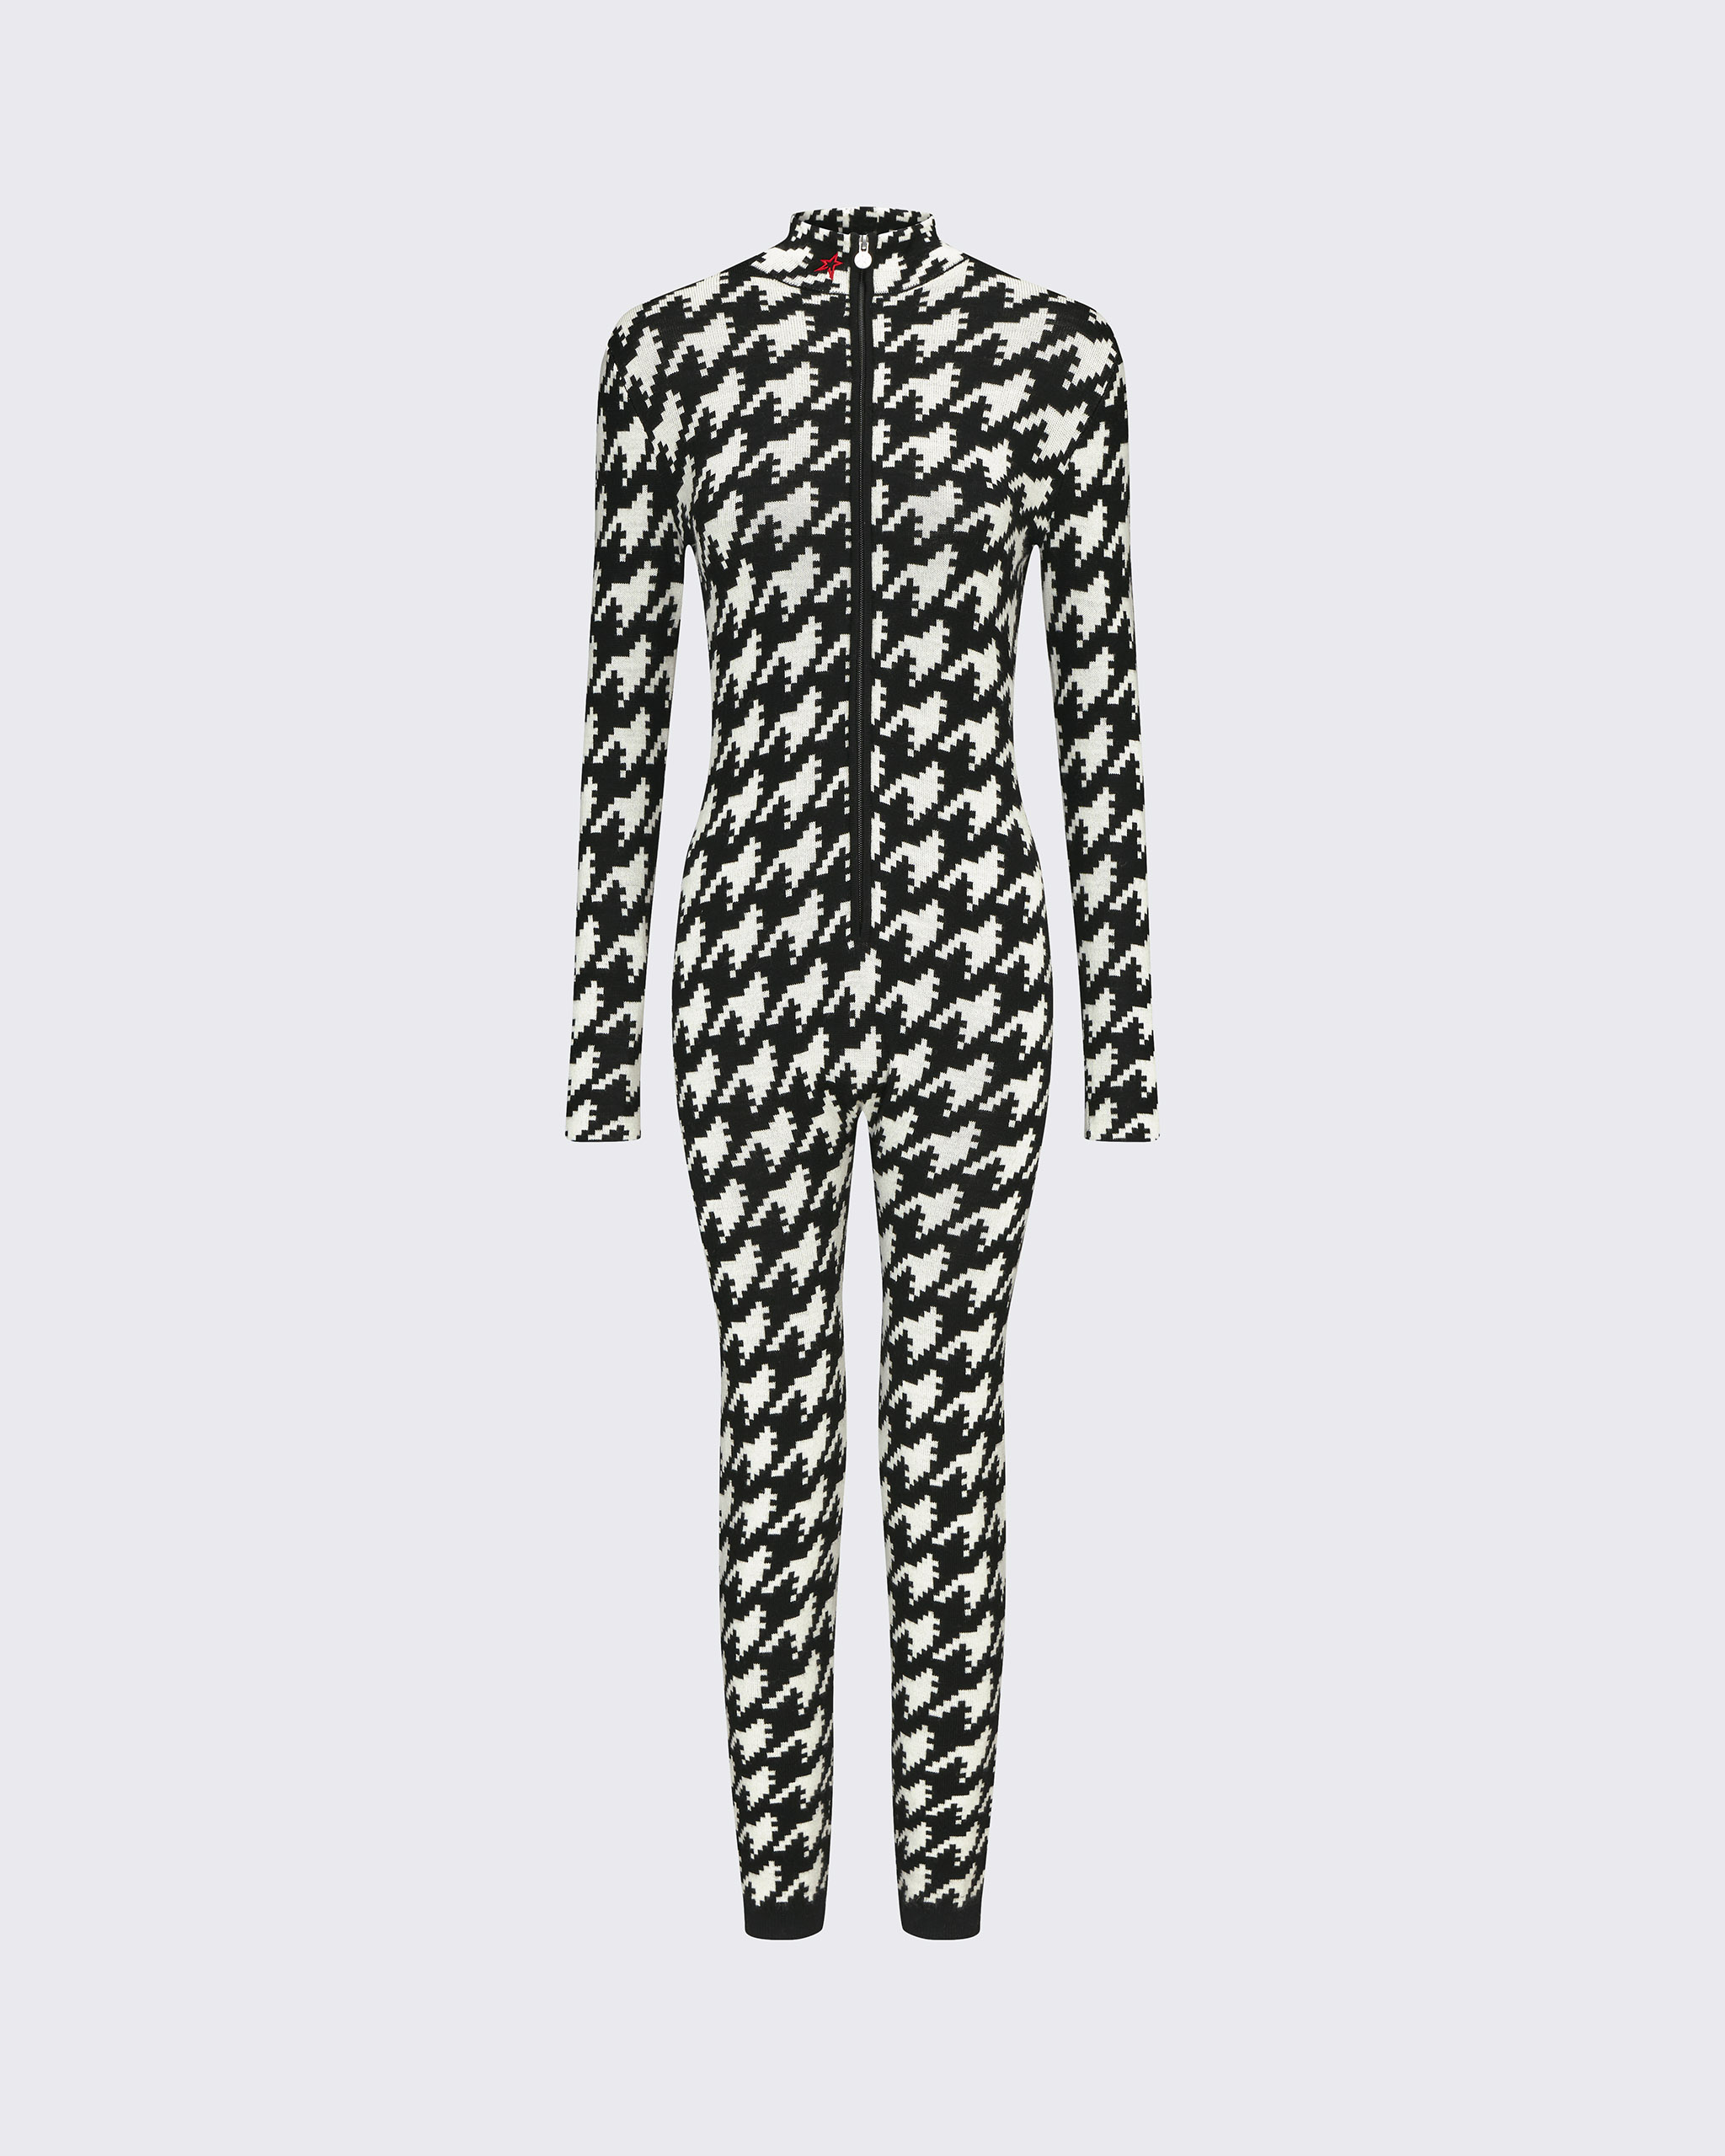 Perfect Moment Houndstooth Jumpsuit Xl In Houndstooth-black-snow-white